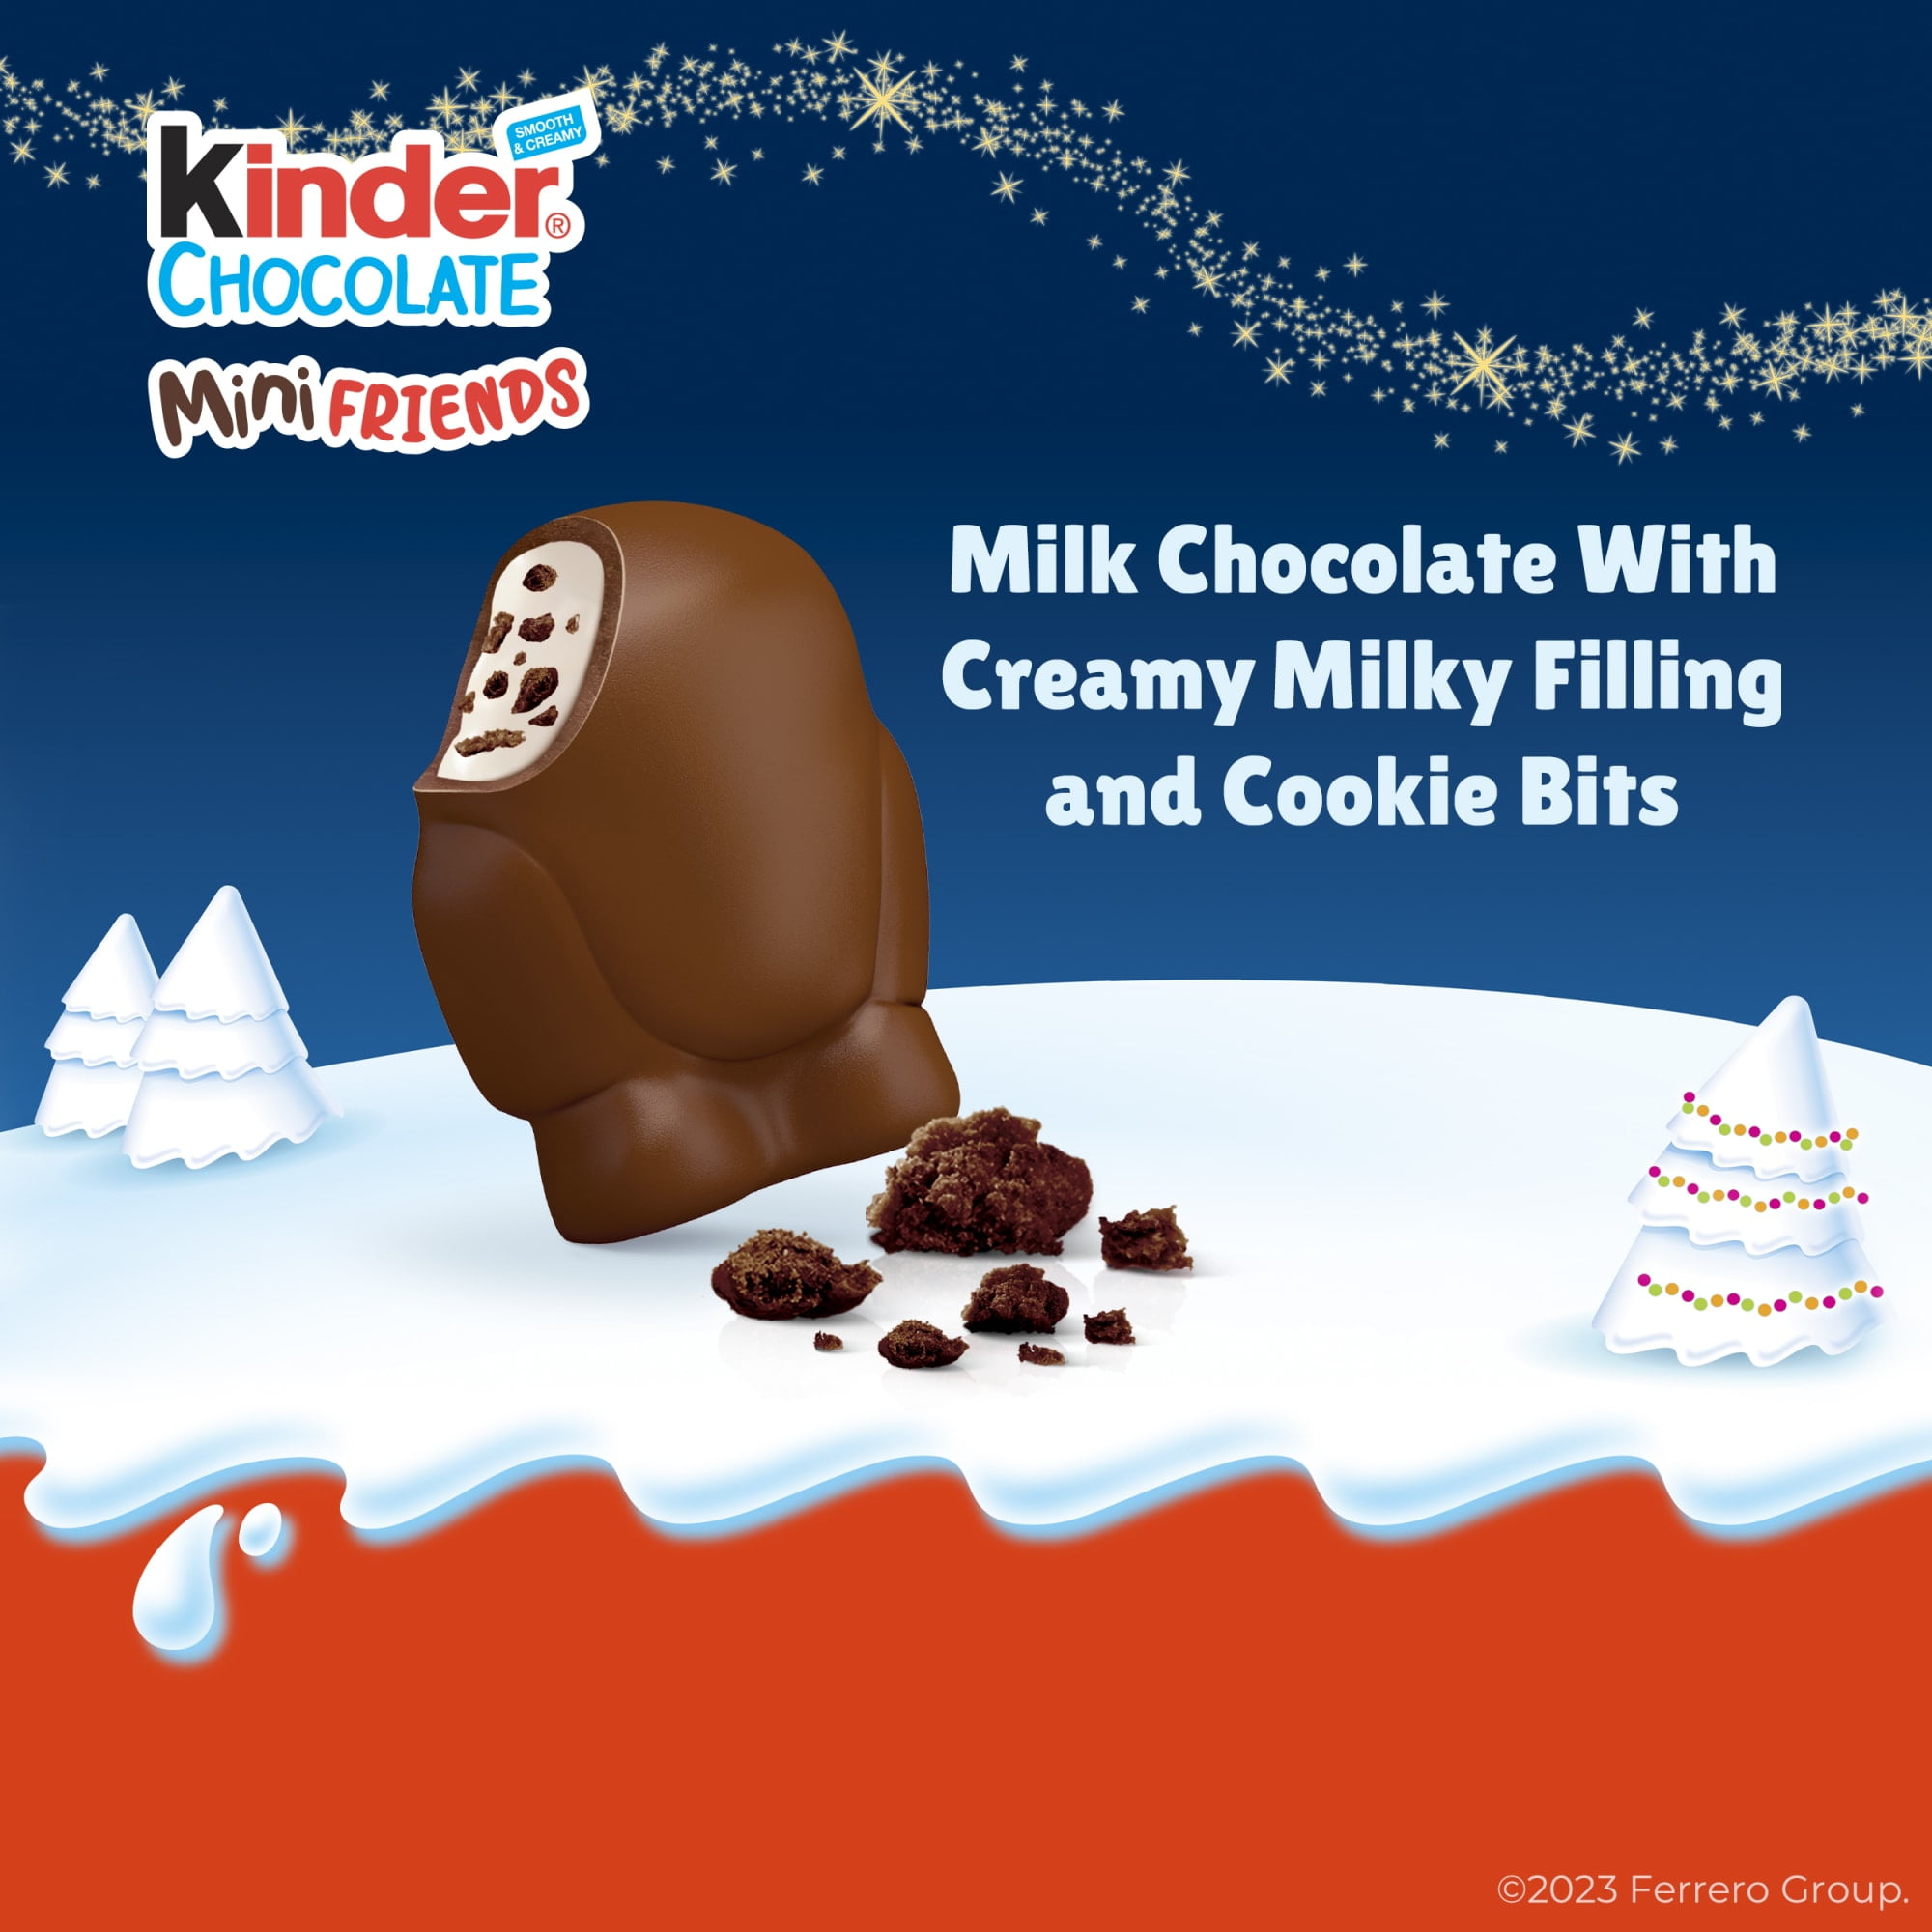 Kinder Chocolate Mini Friends, Creamy Milky Filling And Cookie Bits, 4.3 oz  